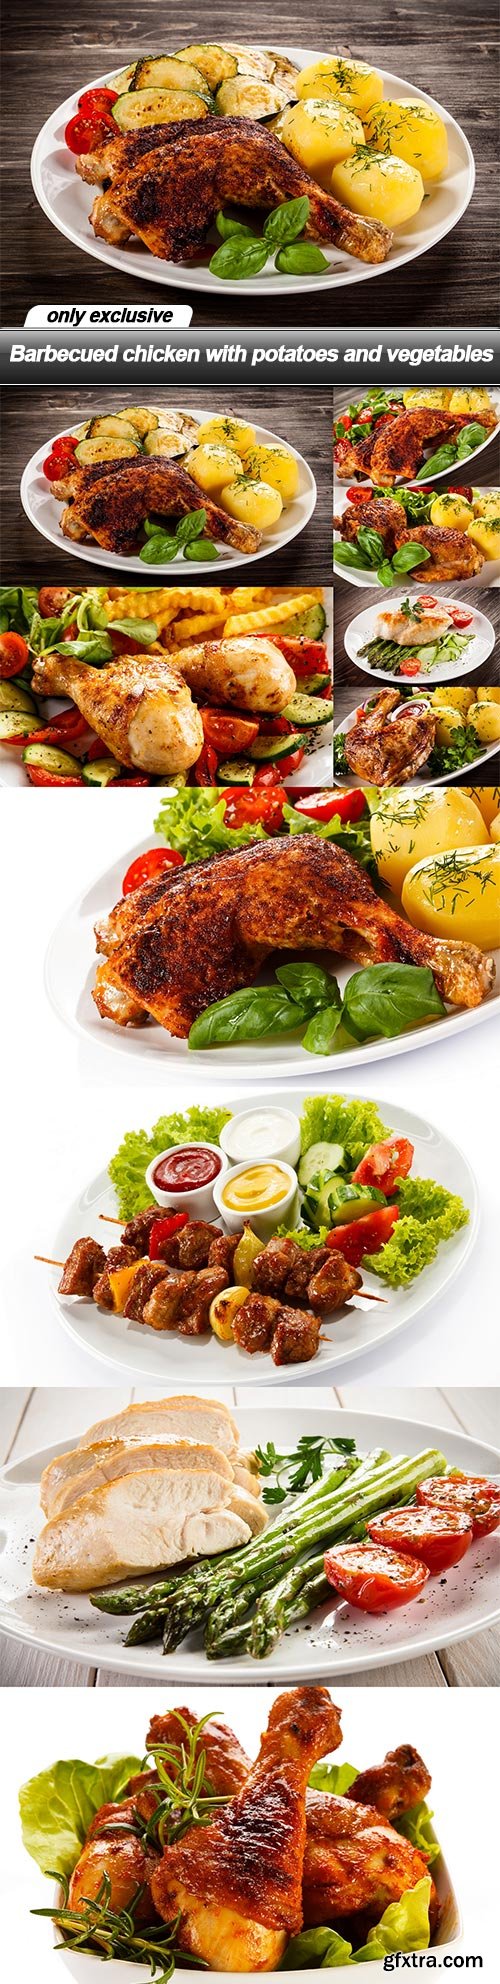 Barbecued chicken with potatoes and vegetables - 10 UHQ JPEG